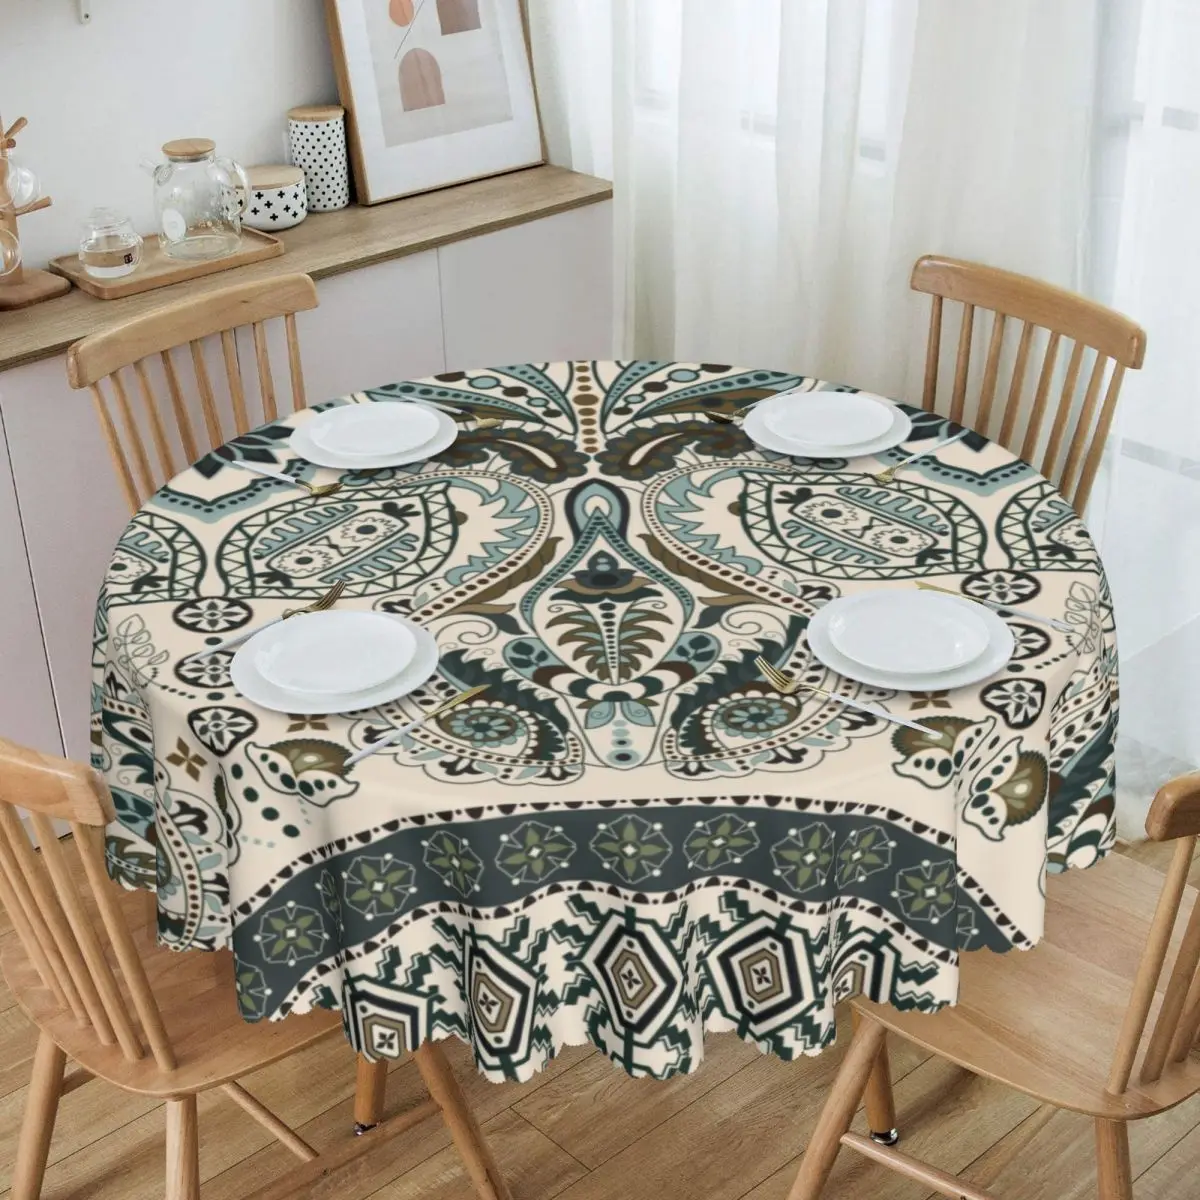 

Round Waterproof Bright Paisley Bohemian Floral Texture Table Cover Boho Tablecloth for Picnic 60 inch Table Cloth